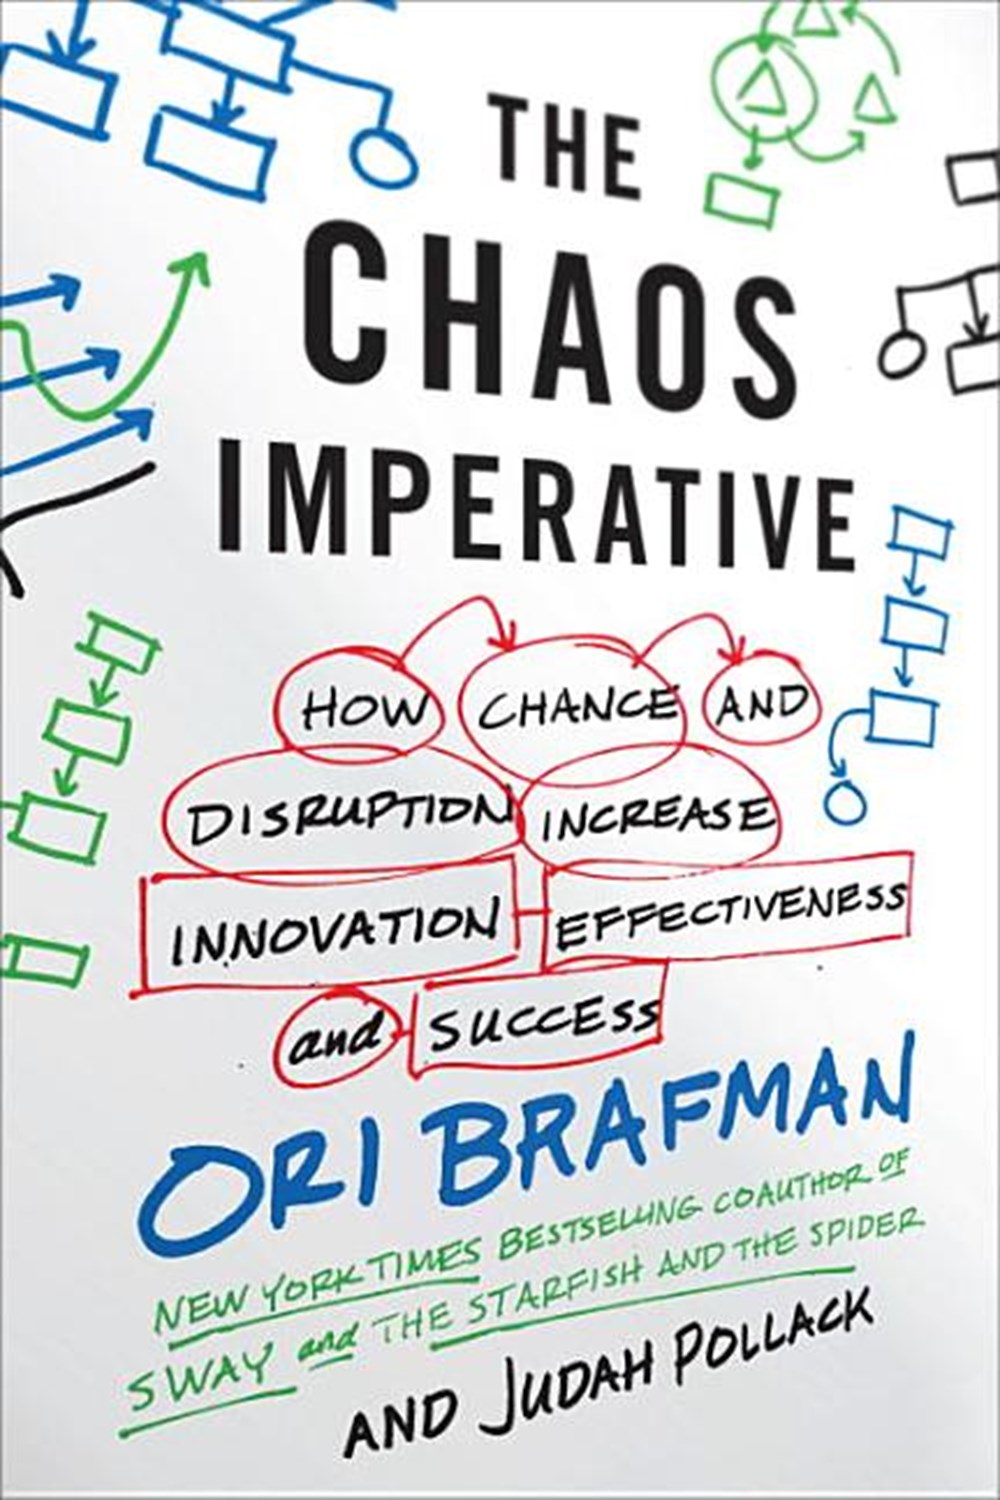 Chaos Imperative: How Chance and Disruption Increase Innovation, Effectiveness, and Success